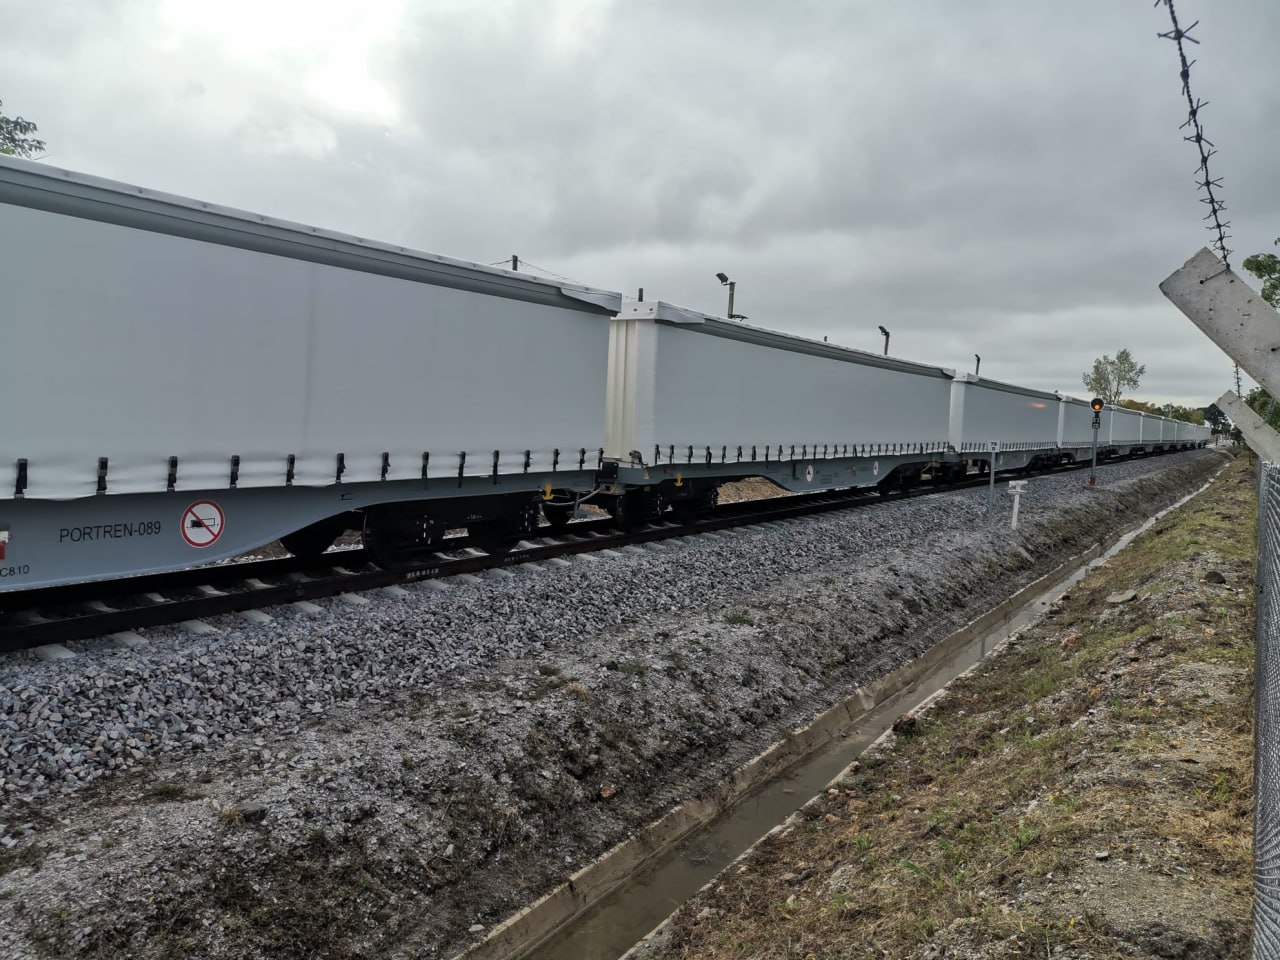 Freight cars on the Ferrocarril Central in Uruguay